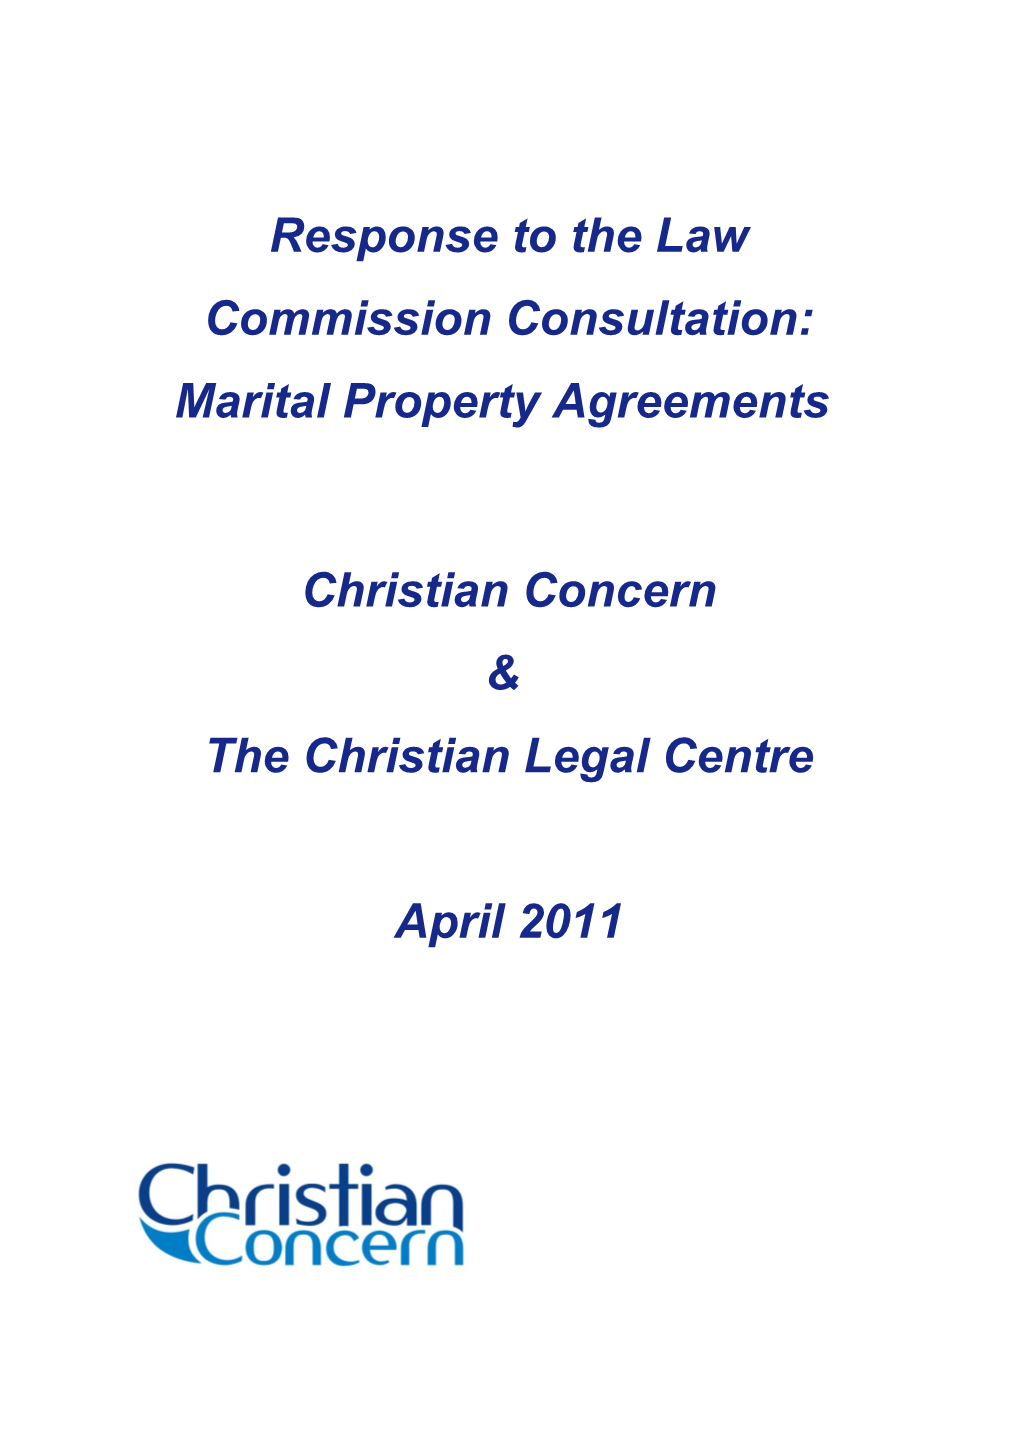 The Christian Legal Centre